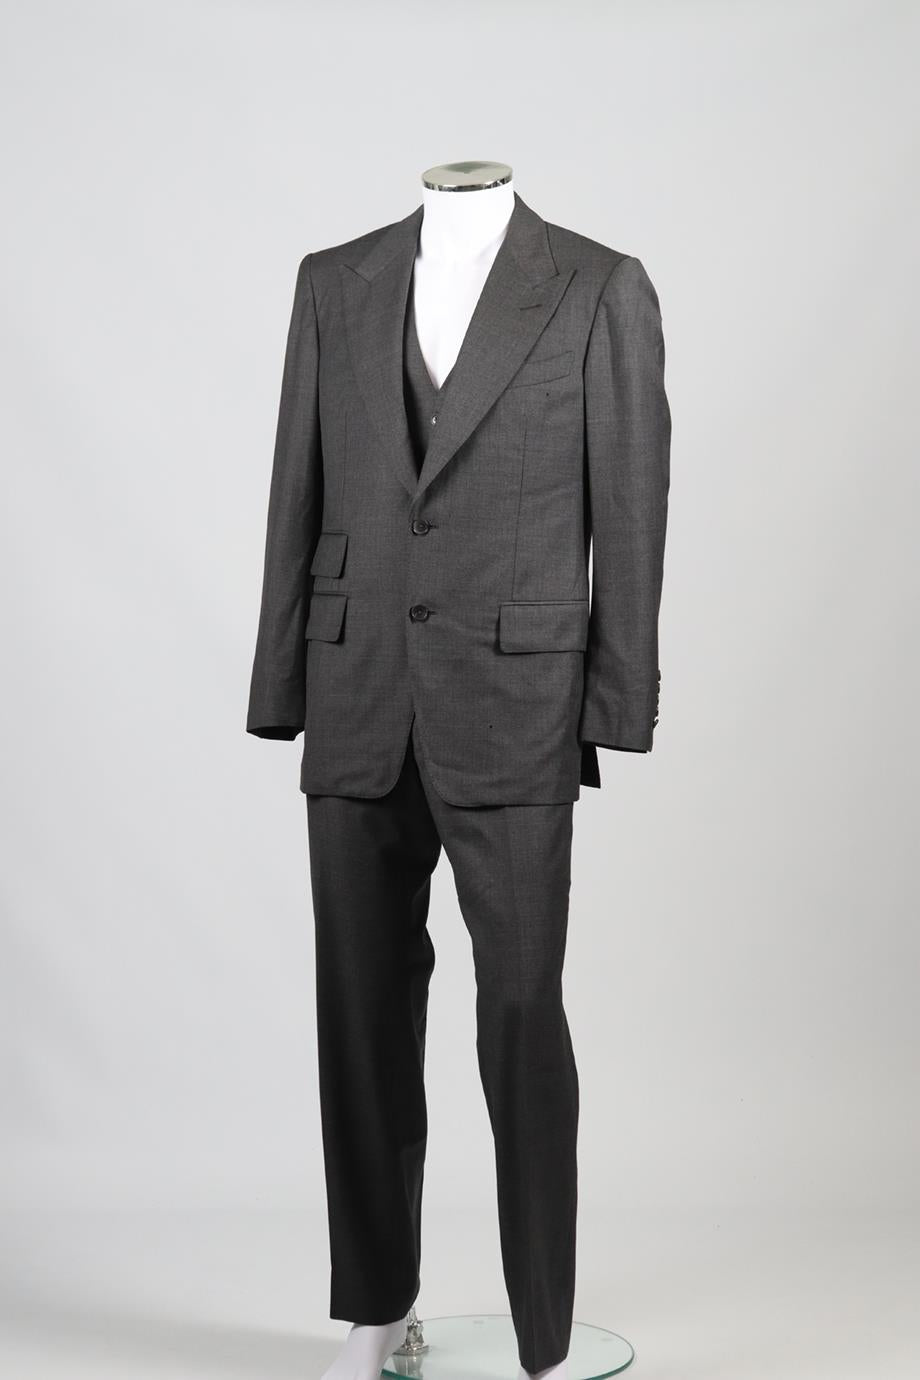 TOM FORD MEN'S WOOL THREE PIECE SUIT IT 50 UK/US CHEST 40